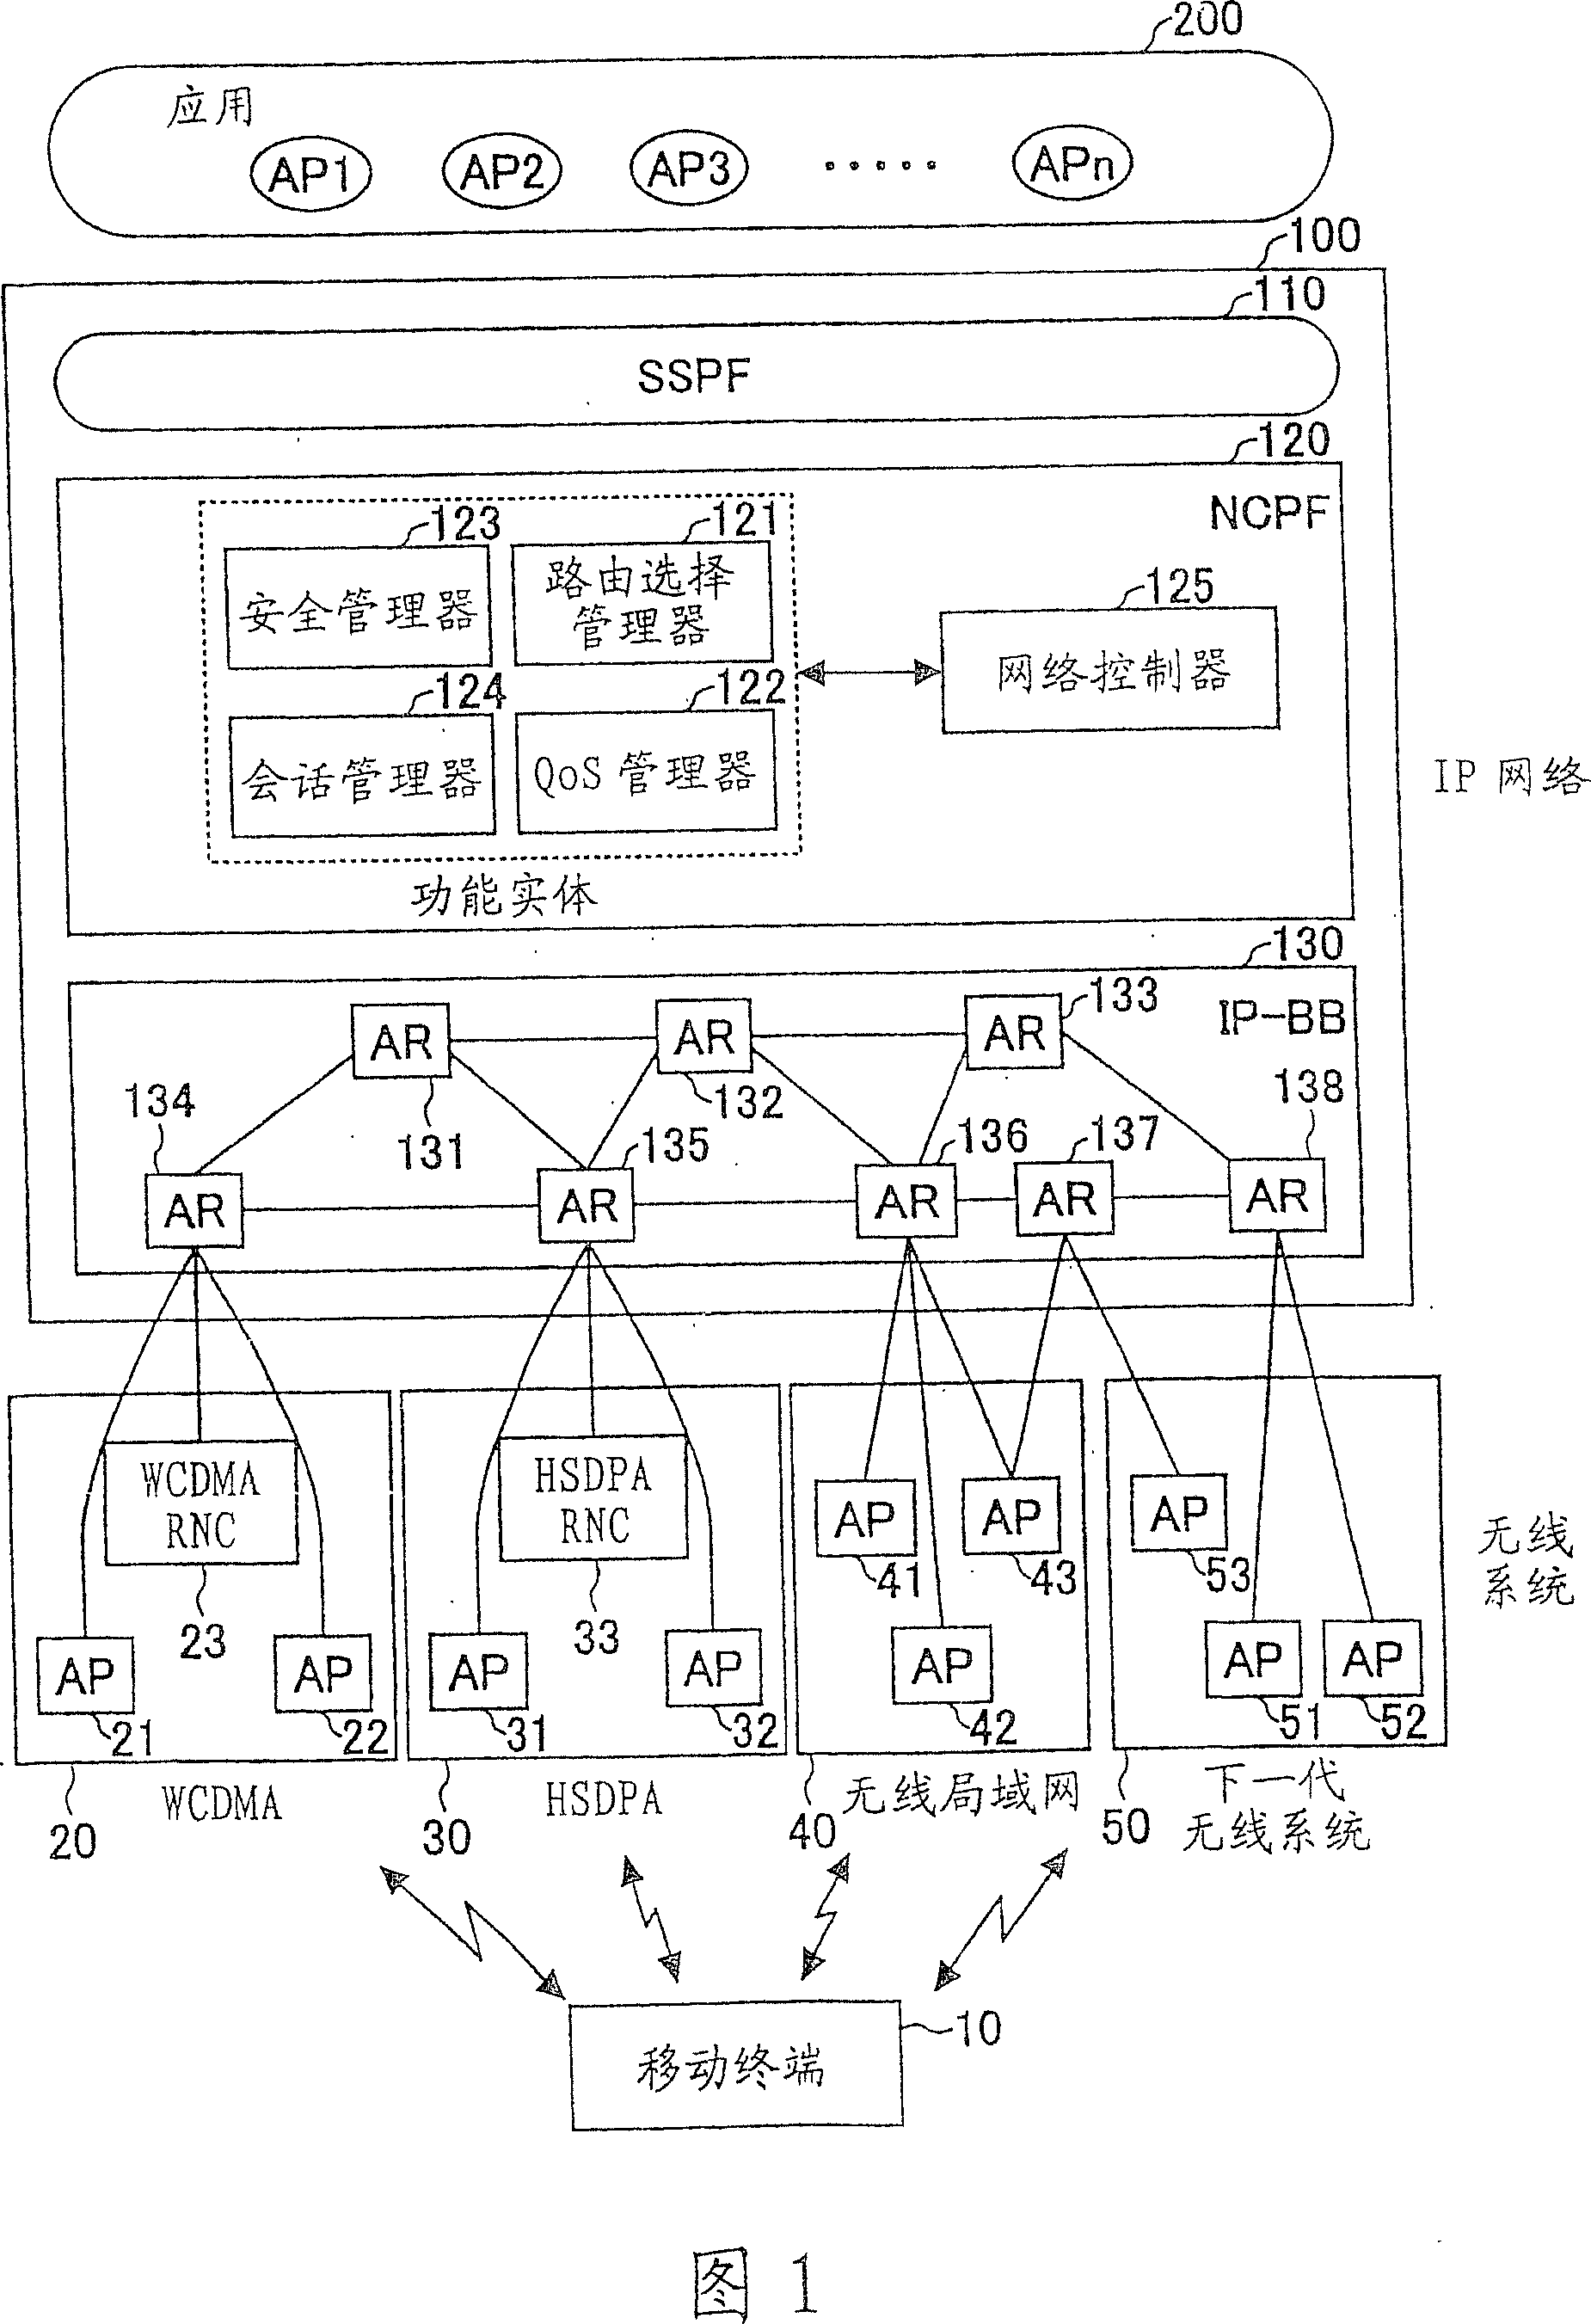 System and method for controlling network, network controlling apparatus, and mobile terminal